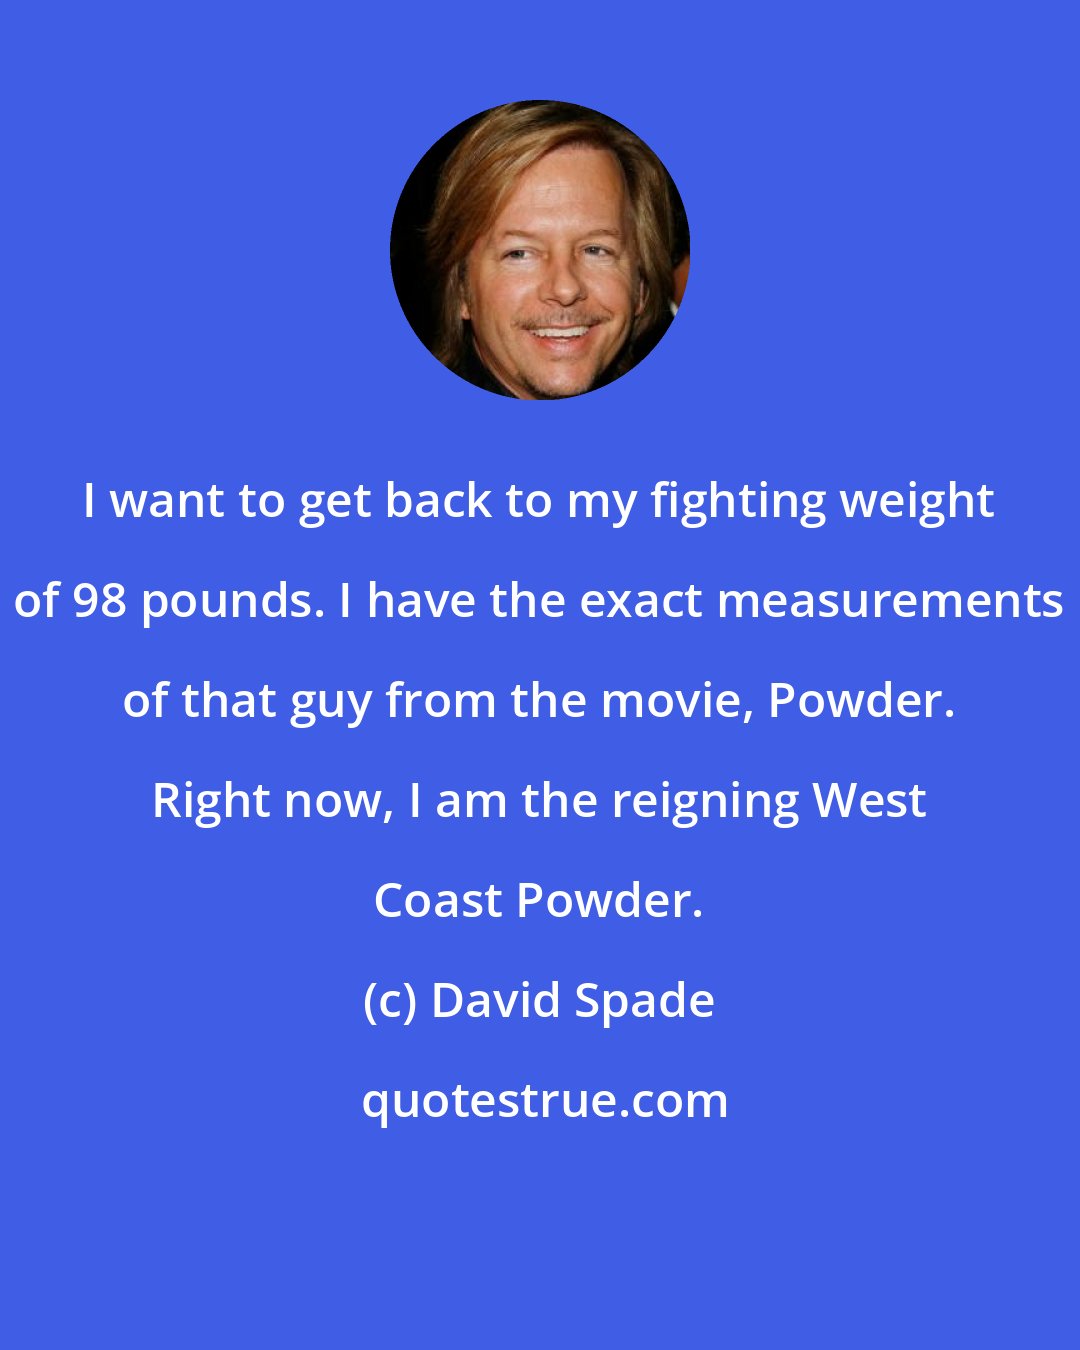 David Spade: I want to get back to my fighting weight of 98 pounds. I have the exact measurements of that guy from the movie, Powder. Right now, I am the reigning West Coast Powder.